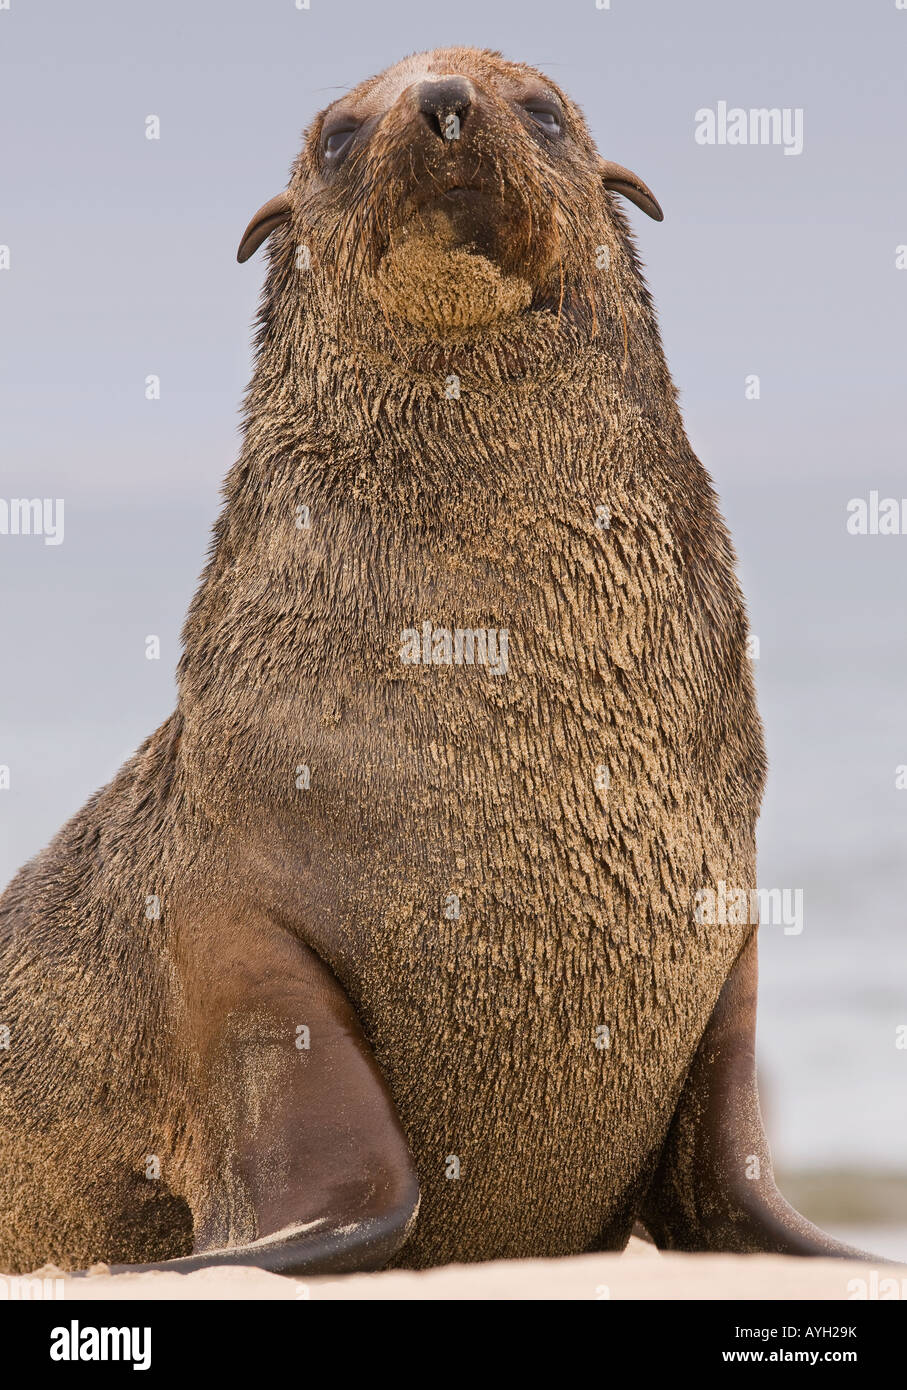 Close up of South African Fur Seal, Namibie, Afrique Banque D'Images